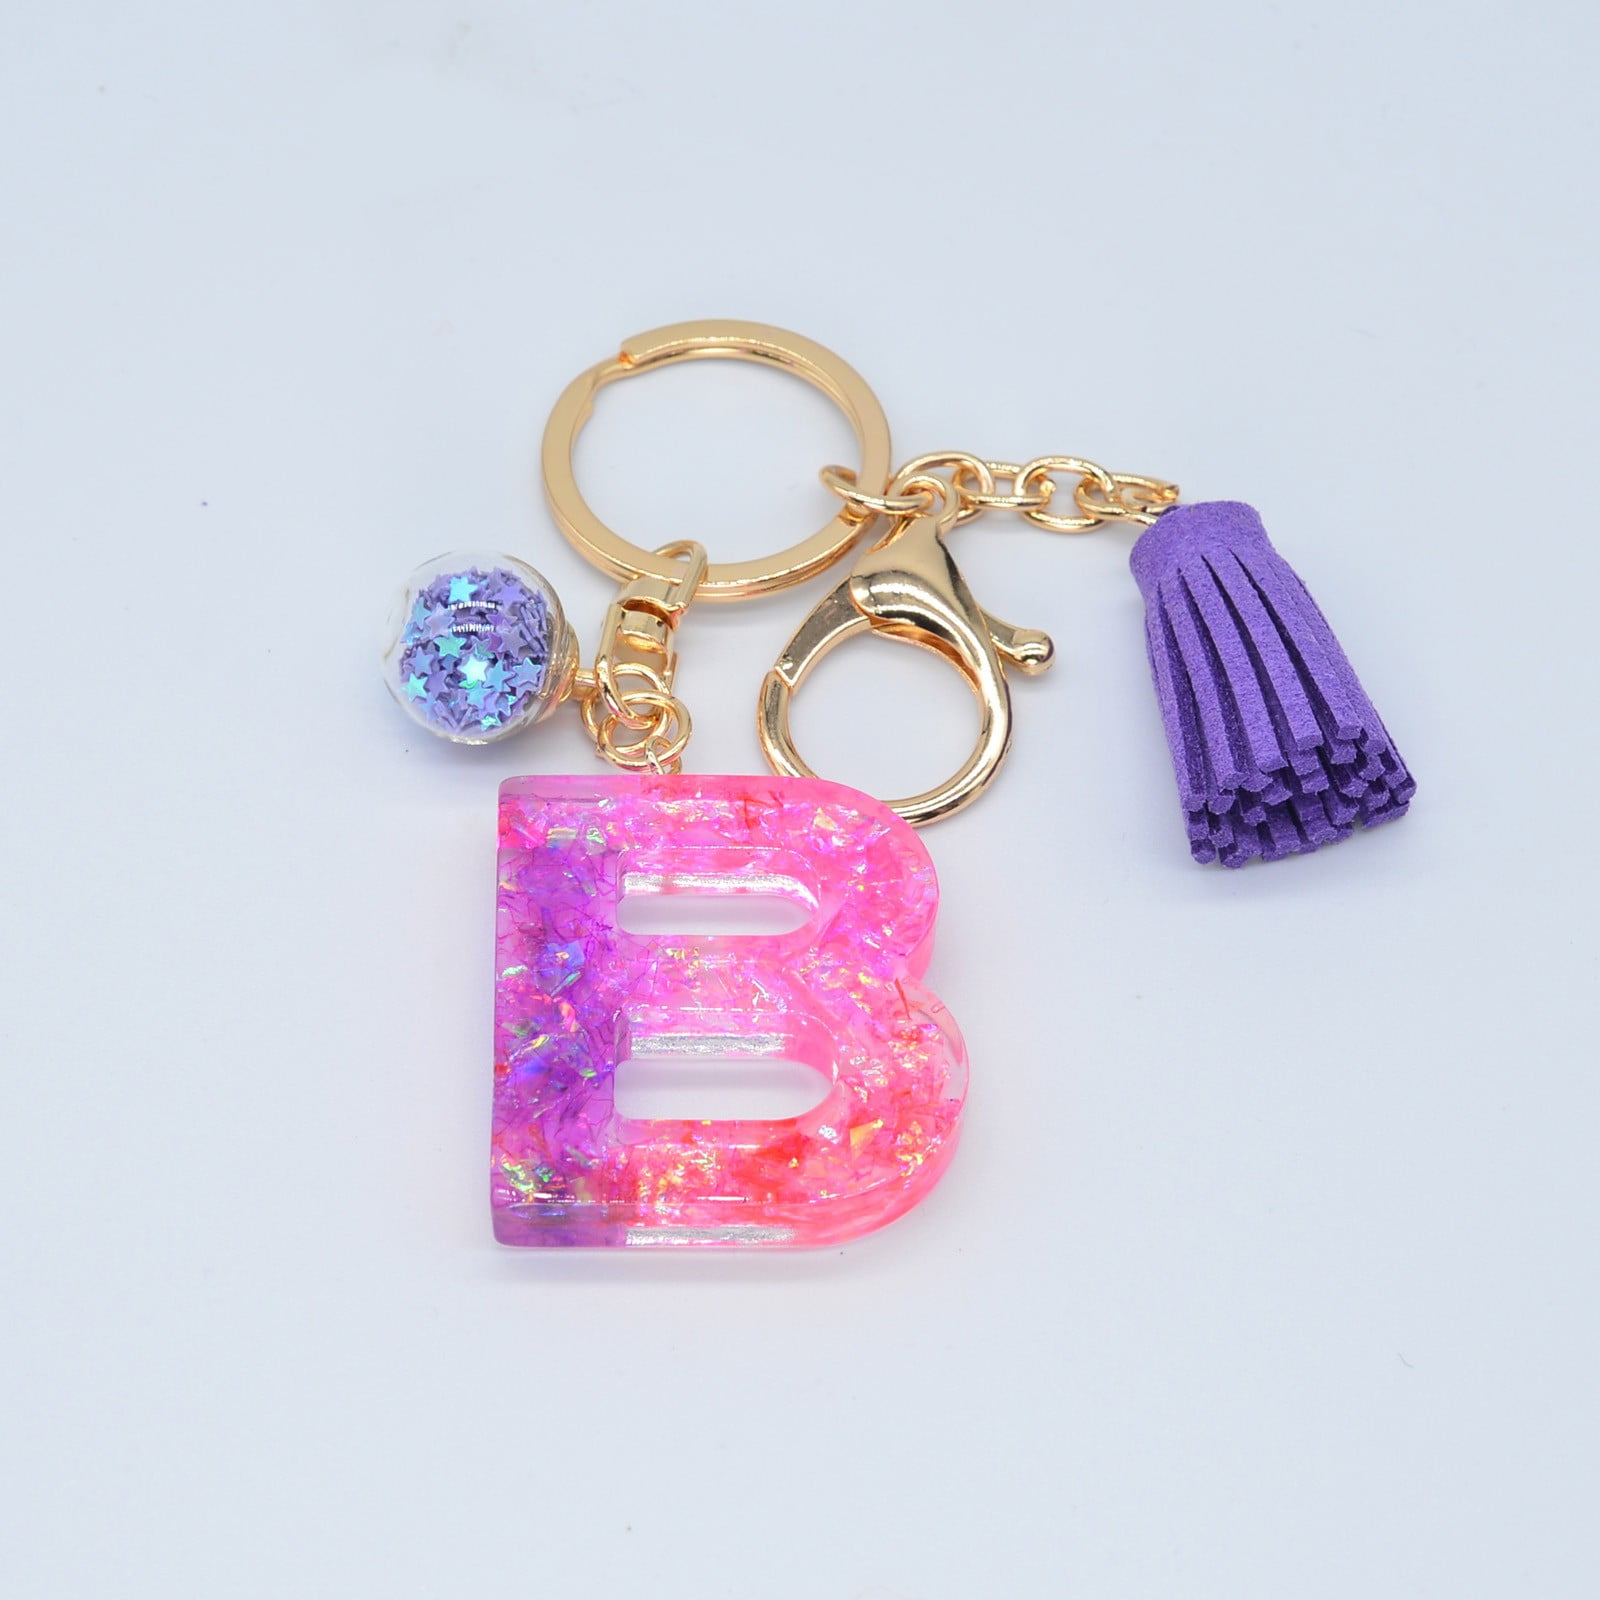 Crafty Angel Art F - Letter - Initial Resin Keychain Translucent Letter F with Sea Shells Inside It and Purple Party Glitter on The Front with A Beaded Charm and A Paw